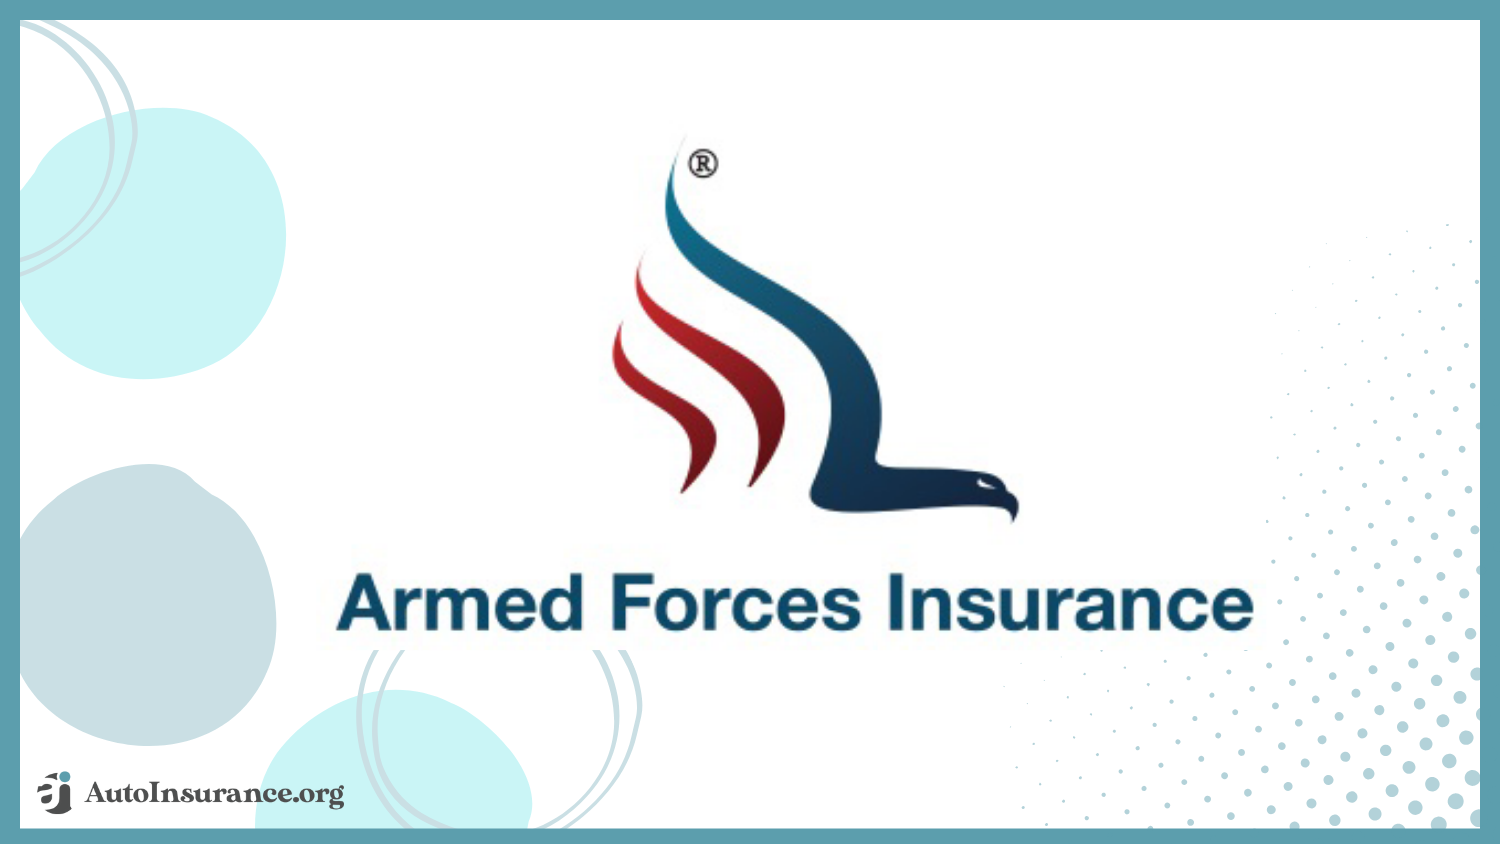 Armed Forces Insurance: Best Auto Insurance for Military Families and Veterans